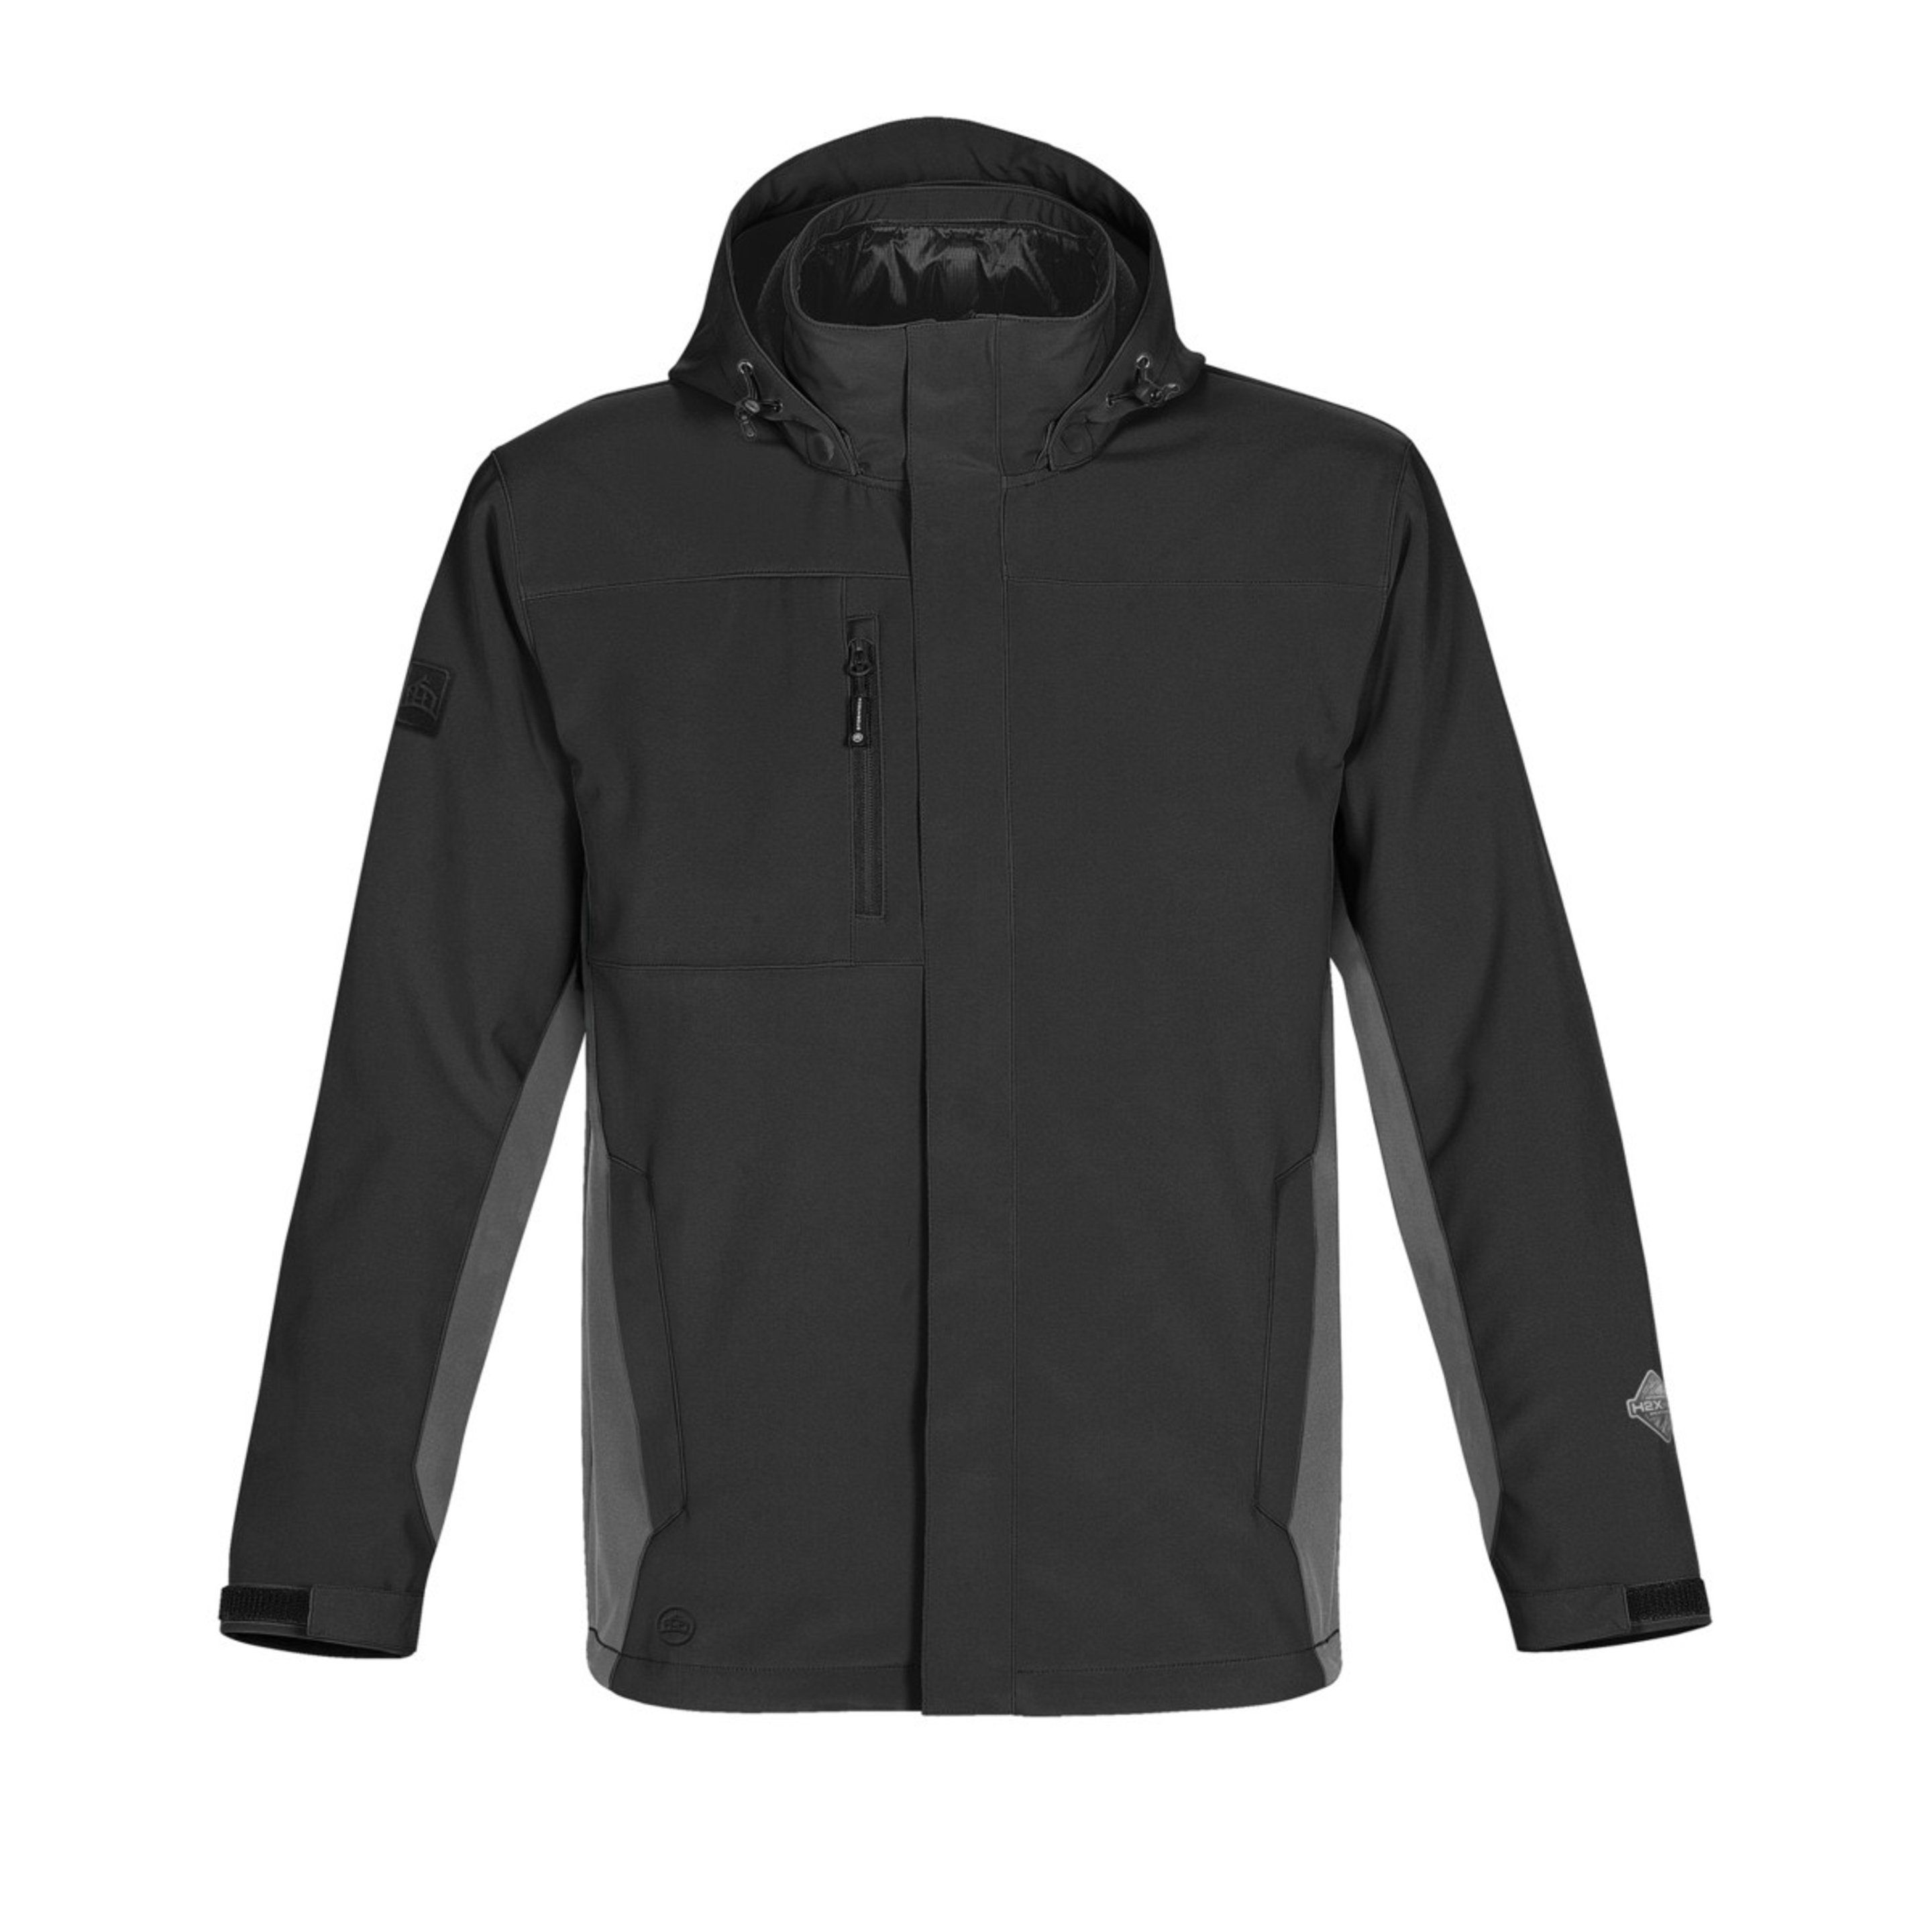 Chaqueta Impermeable Y Transpirable Modelo Atmosphere  Stormtech - negro - 